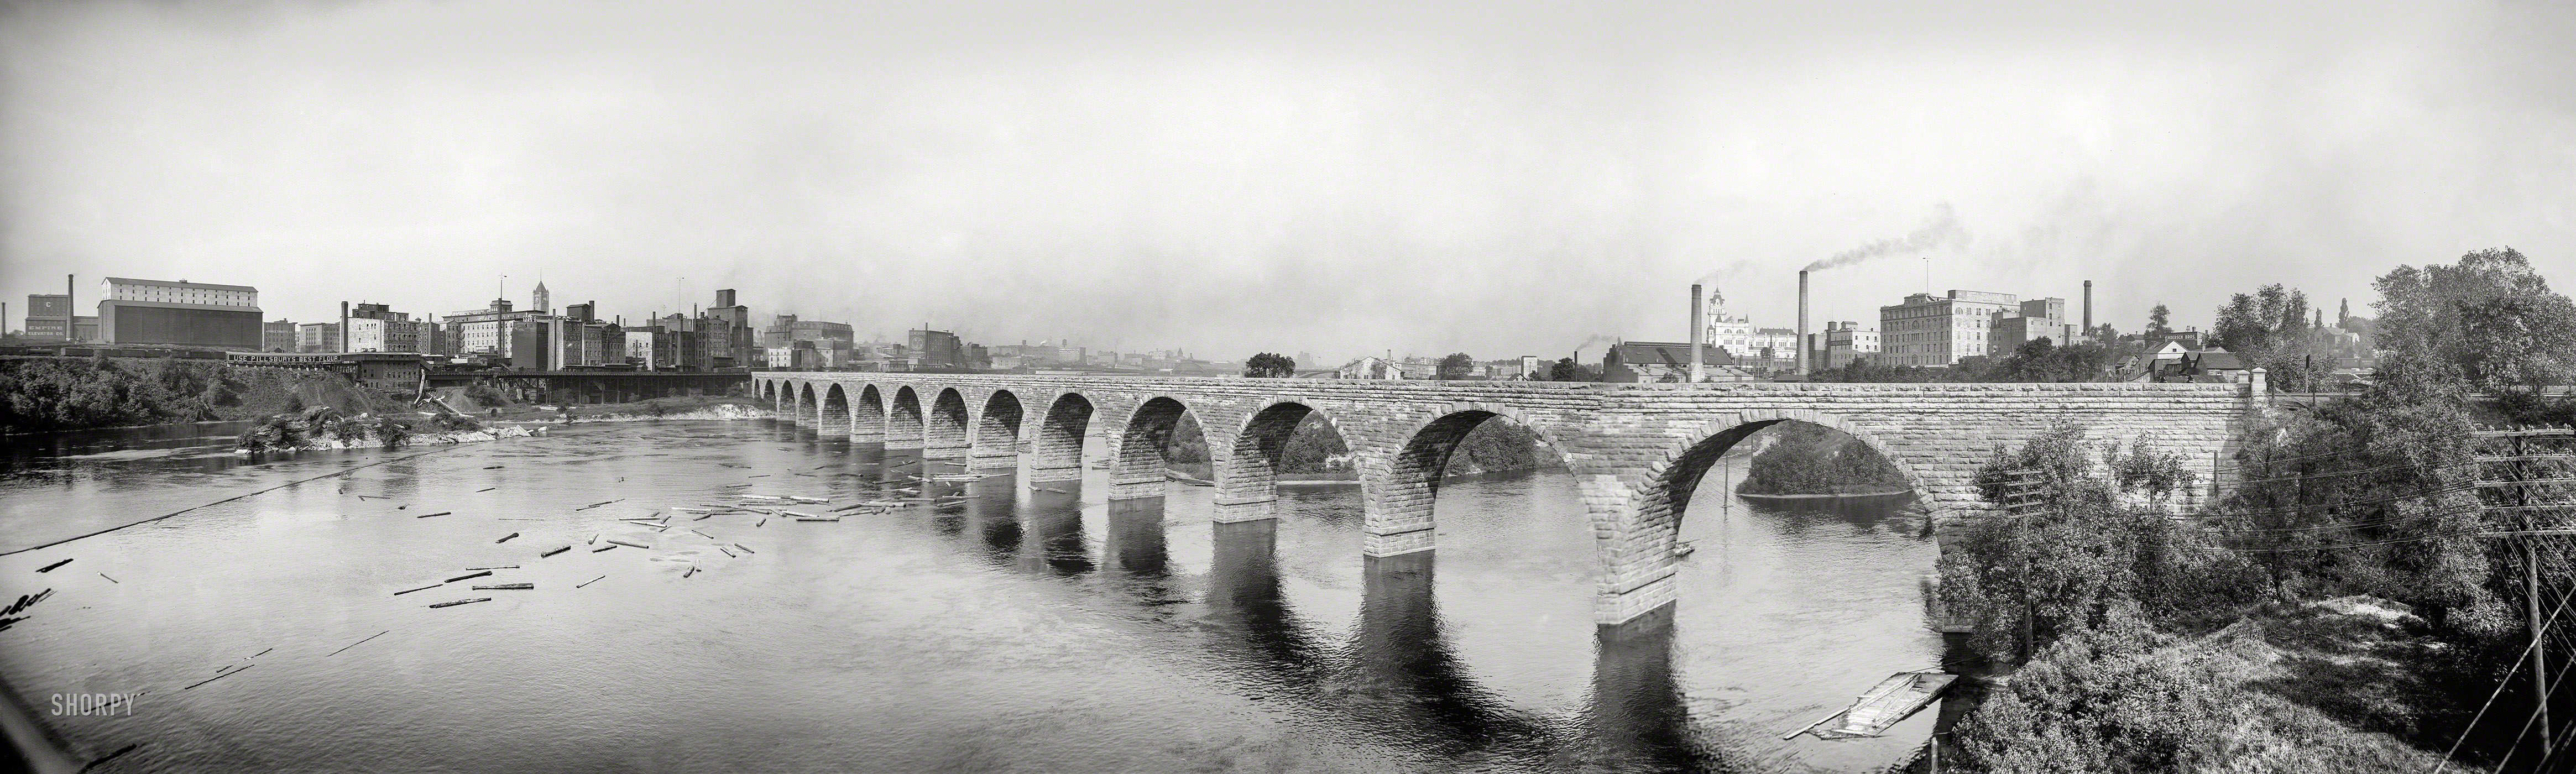 Minneapolis, 1905. "Stone Arch Bridge, which carries railroad traffic over the Mississippi River." Panorama from three 8x10 glass negatives. View full size.